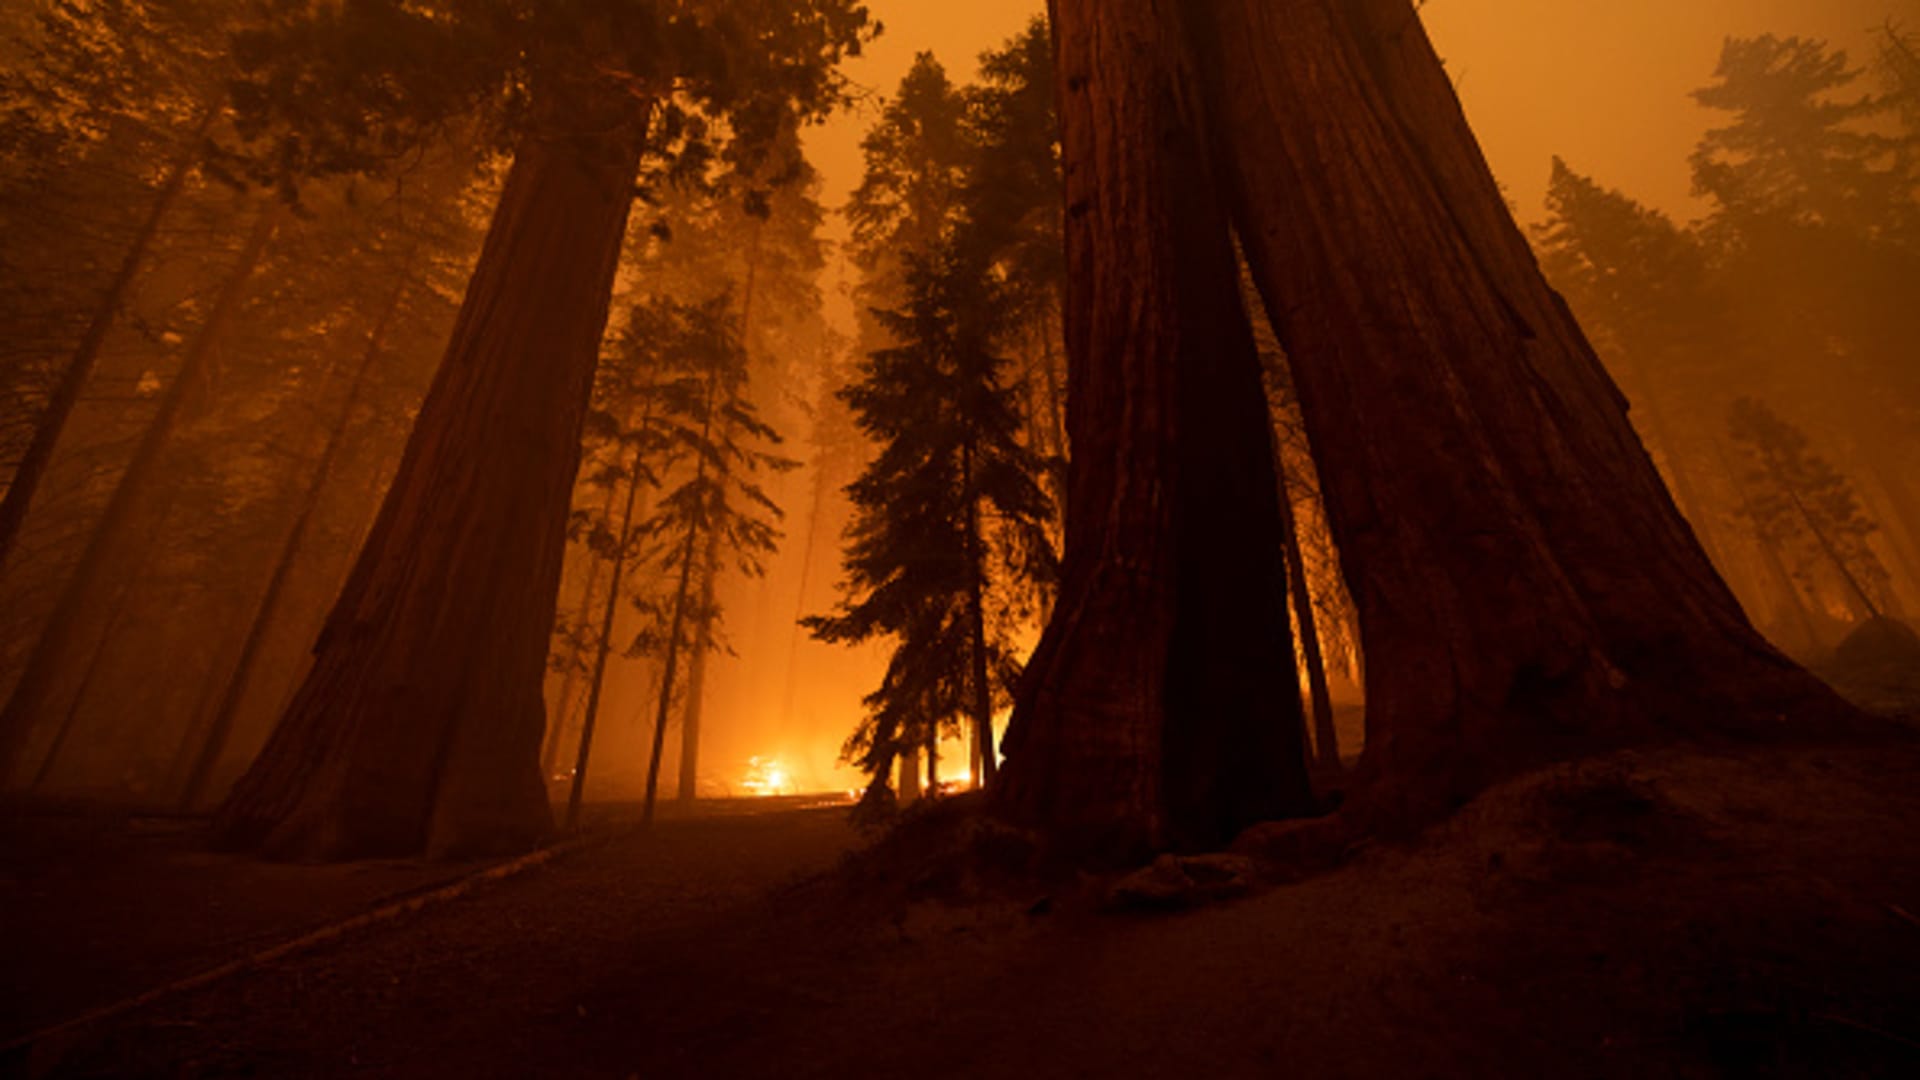 The Windy Fire blazes through the Long Meadow Grove of giant sequoia trees near the Trail of 100 Giants overnight in Sequoia National Park, near California Hot Springs, California, on Sept. 21, 2021.